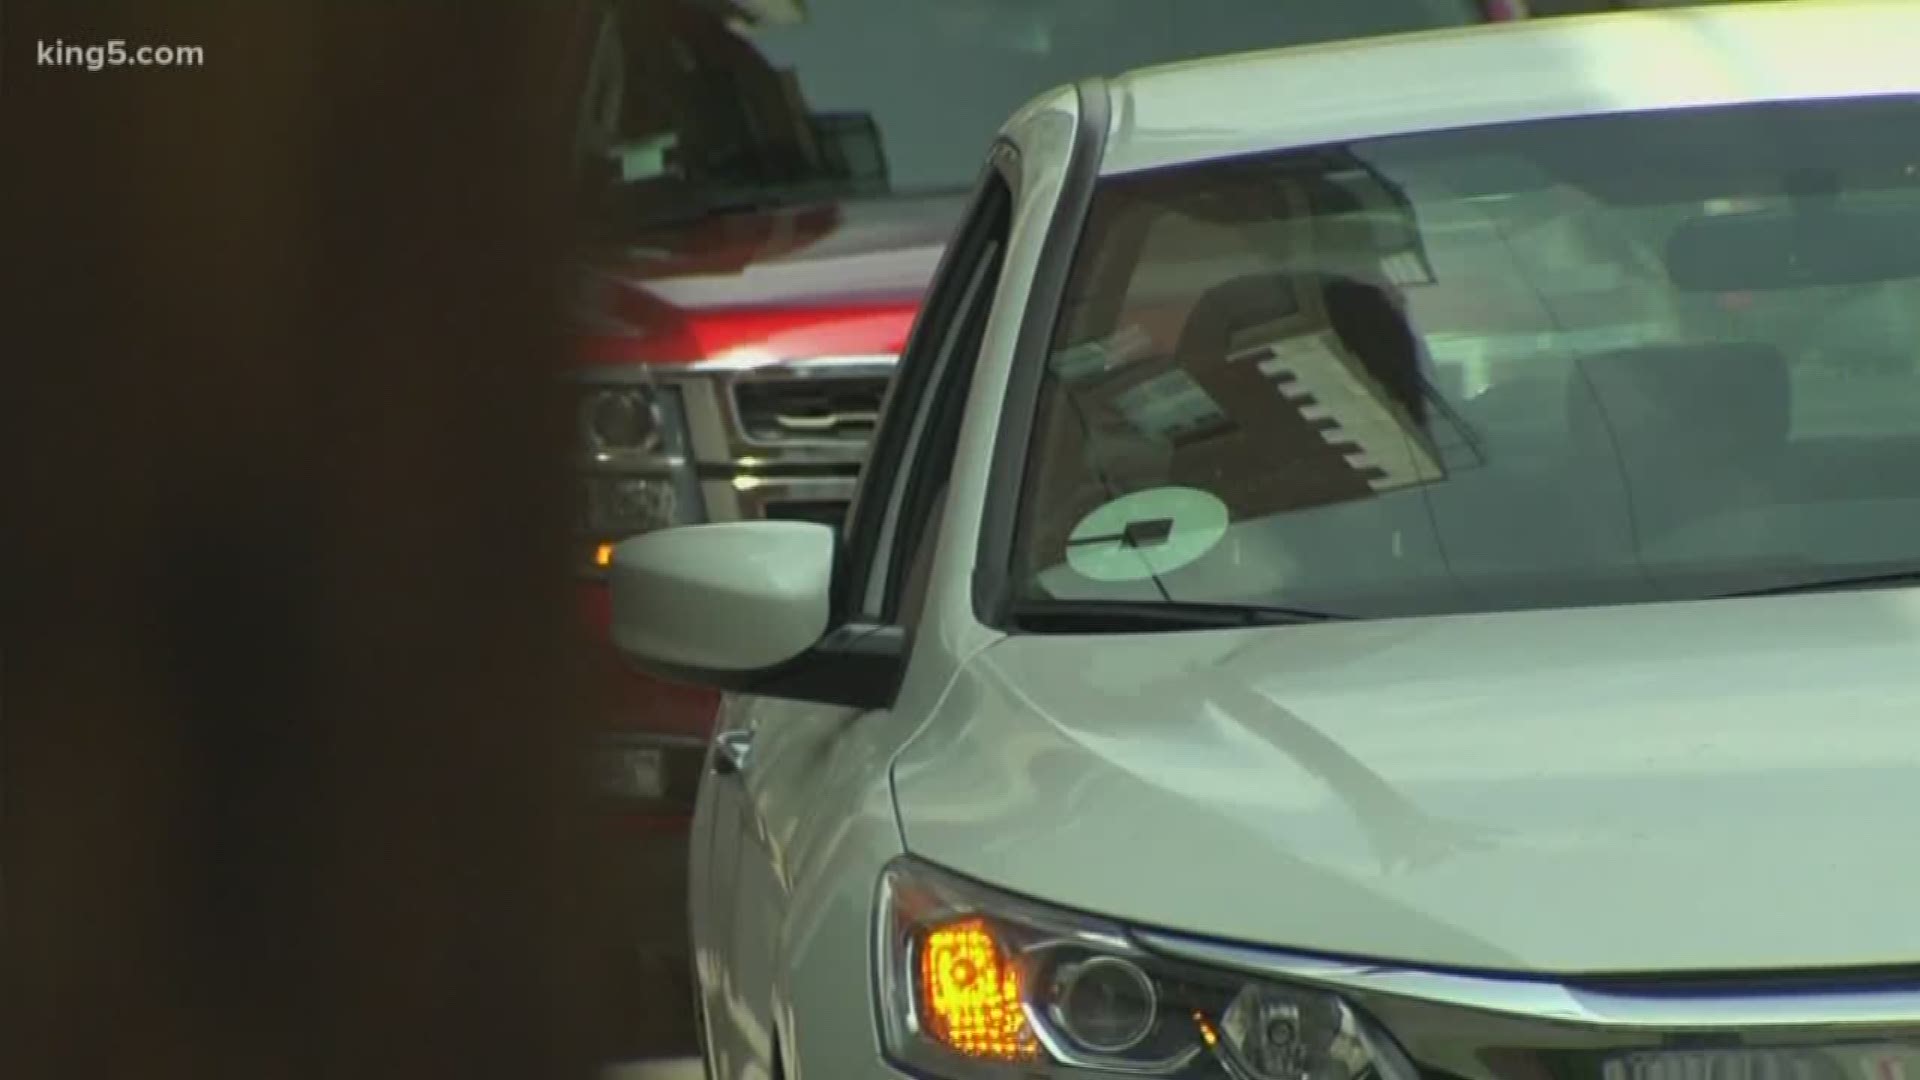 After an uptick in reports of misconduct and assault by rideshare drivers, the King County Council looked to learn more about how the drivers are screened. The council had a lot of questions for Uber and Lyft. KING 5's Kalie Greenberg has more.